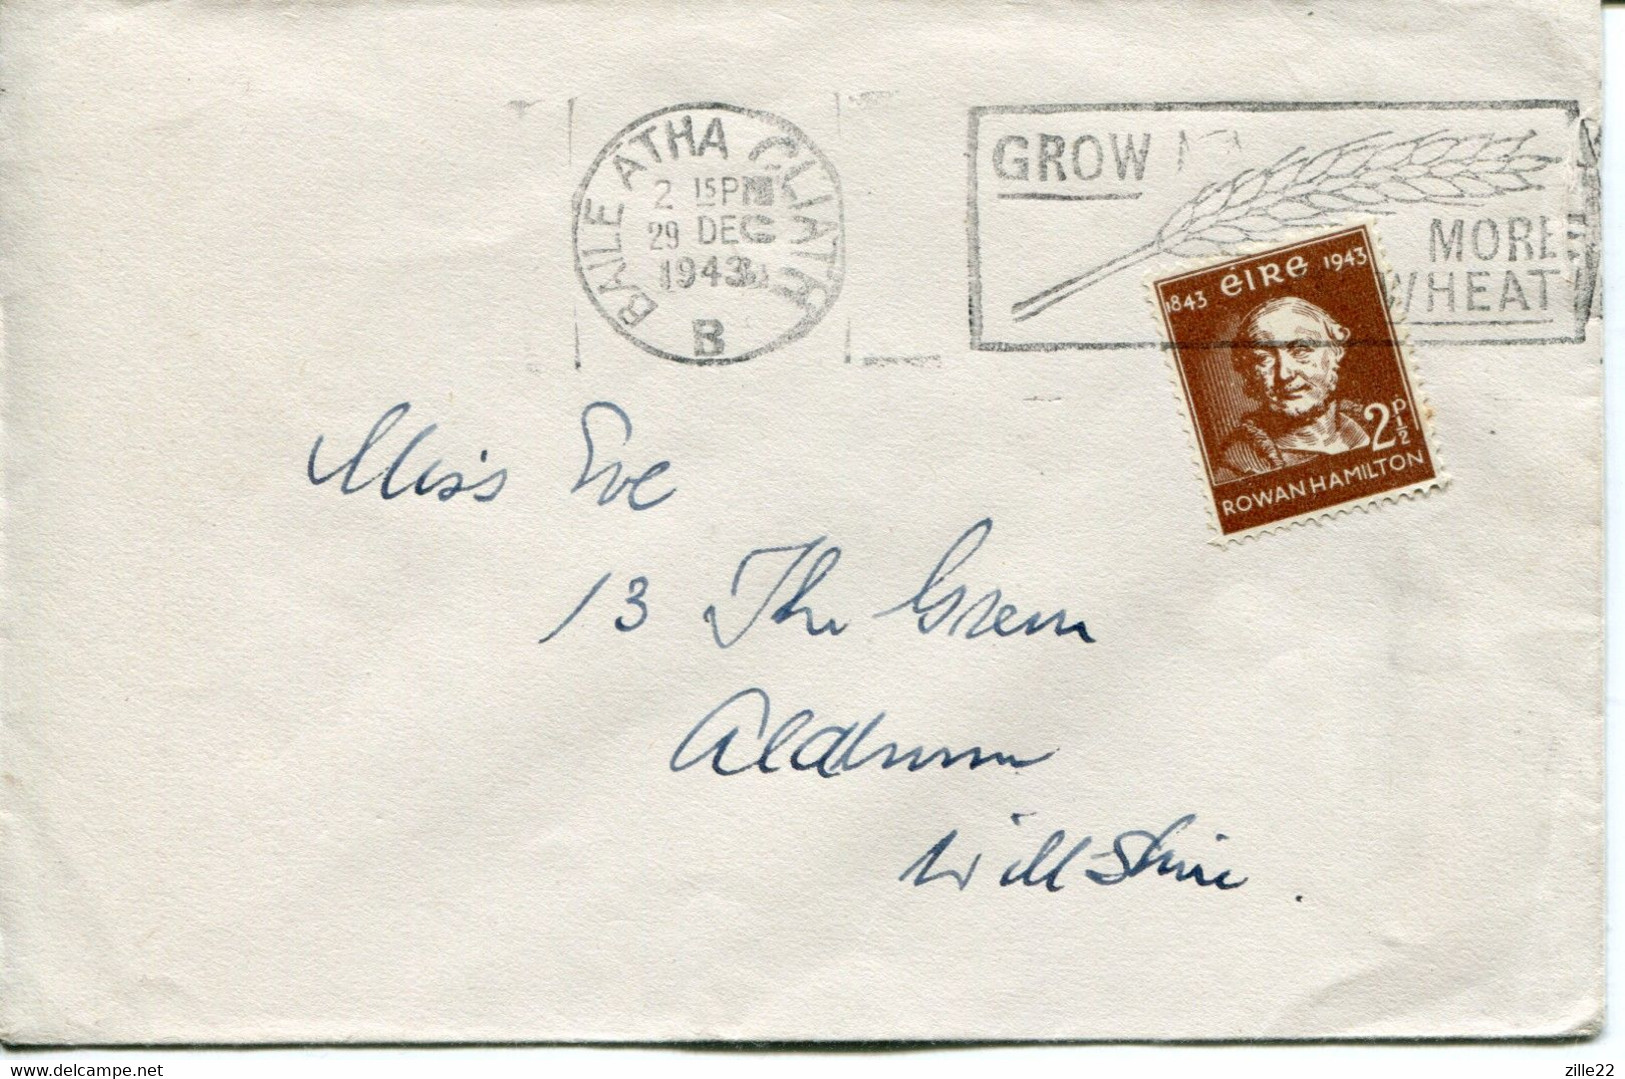 Irland Eire Letter 1943 , Grow More Wheat Cancellation - Covers & Documents